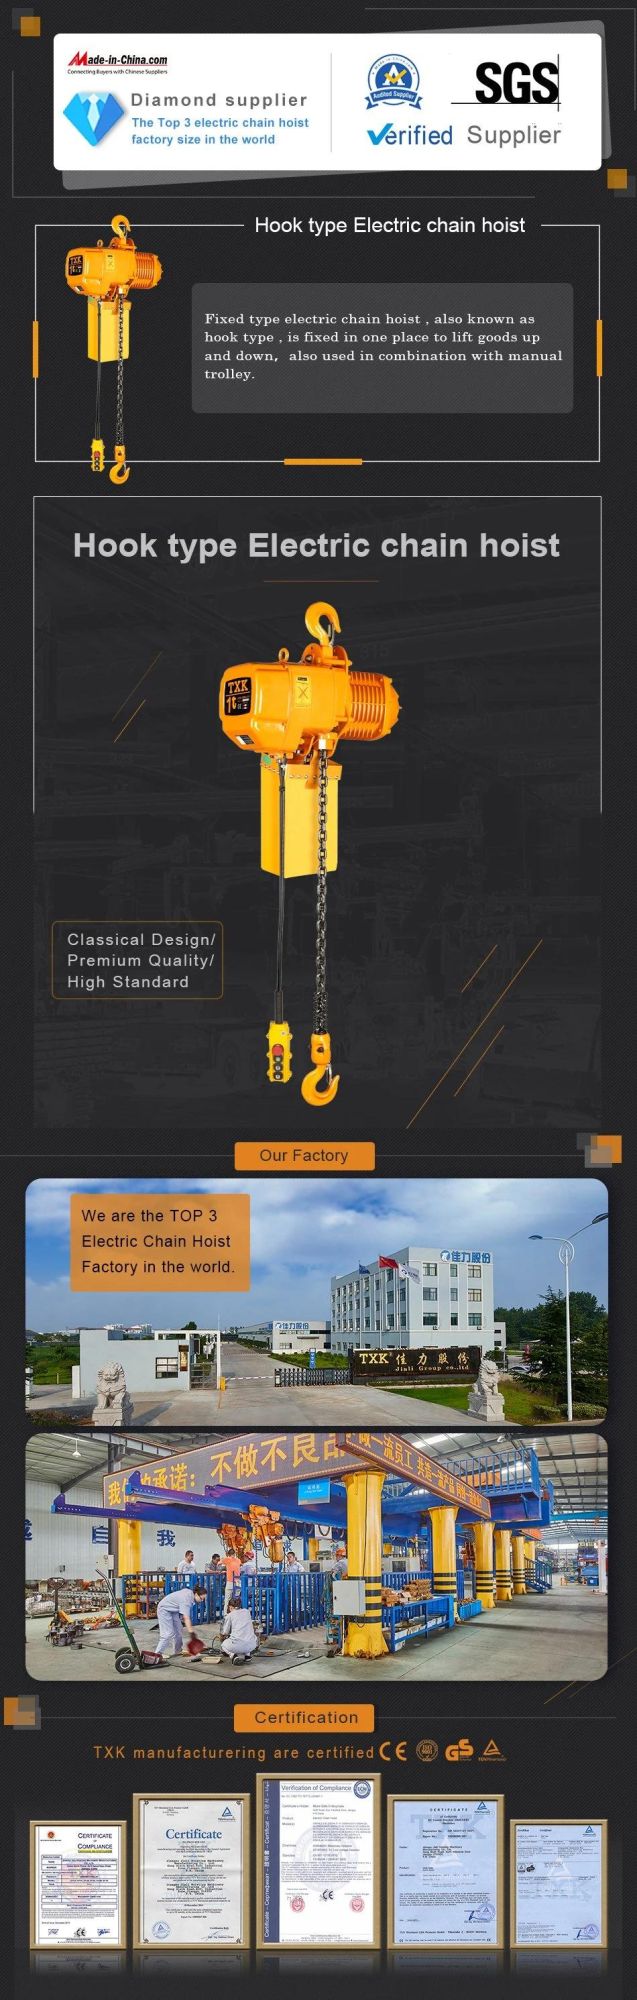 Txk 1 Ton 1 Chain Single Speed Electric Chain Hoist with Hook